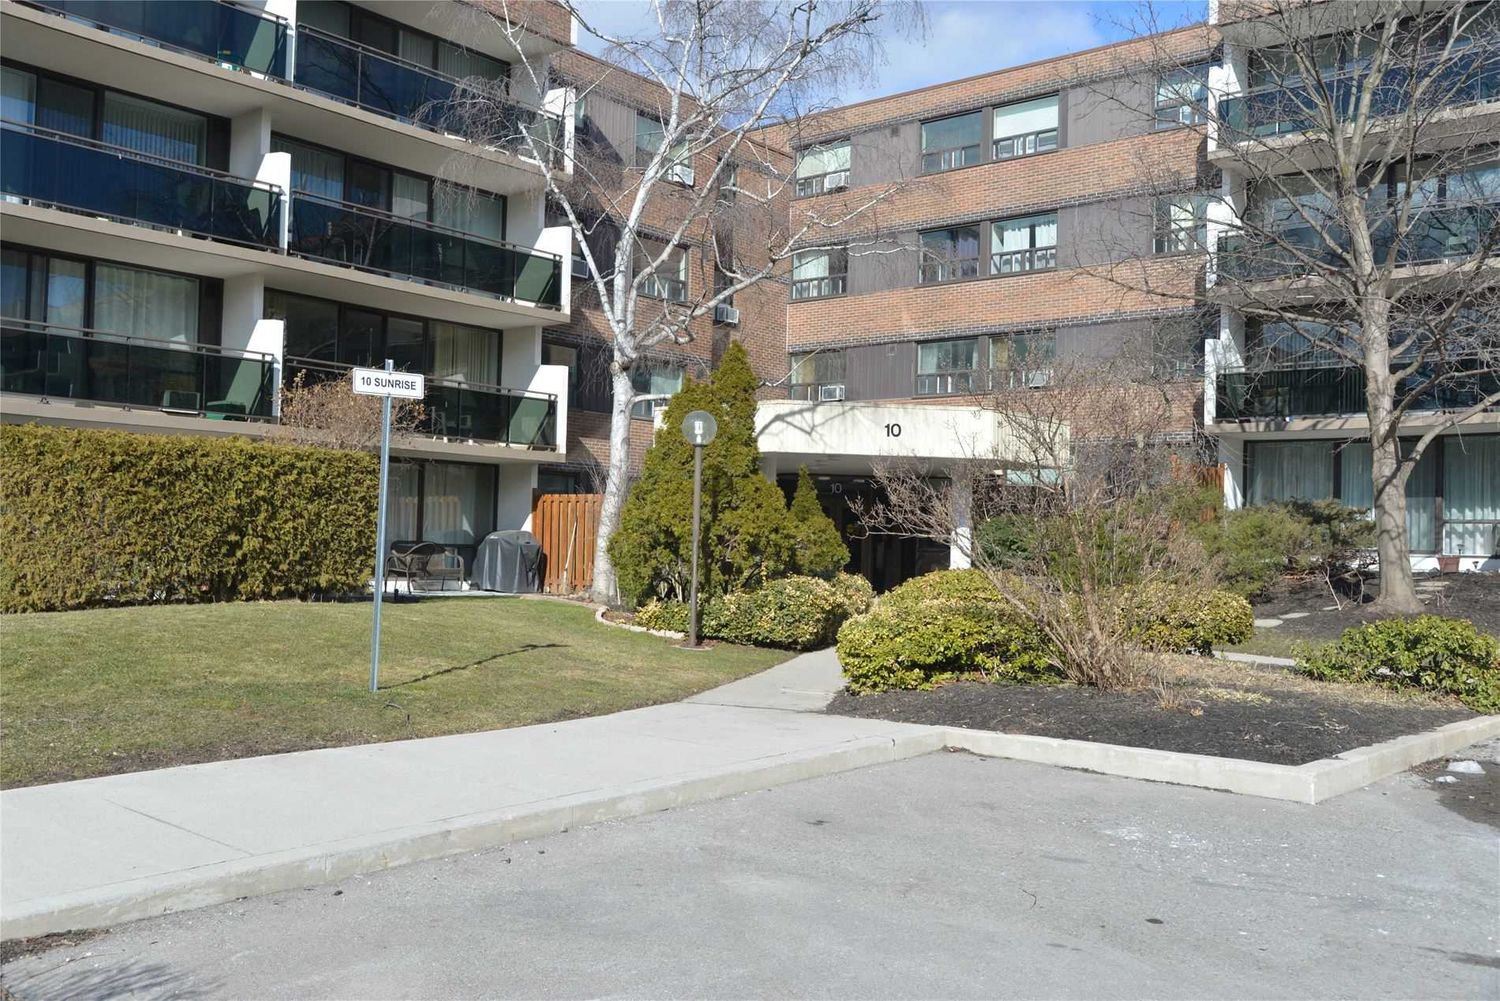 10 Sunrise Avenue. Victoria Town is located in  North York, Toronto - image #2 of 2